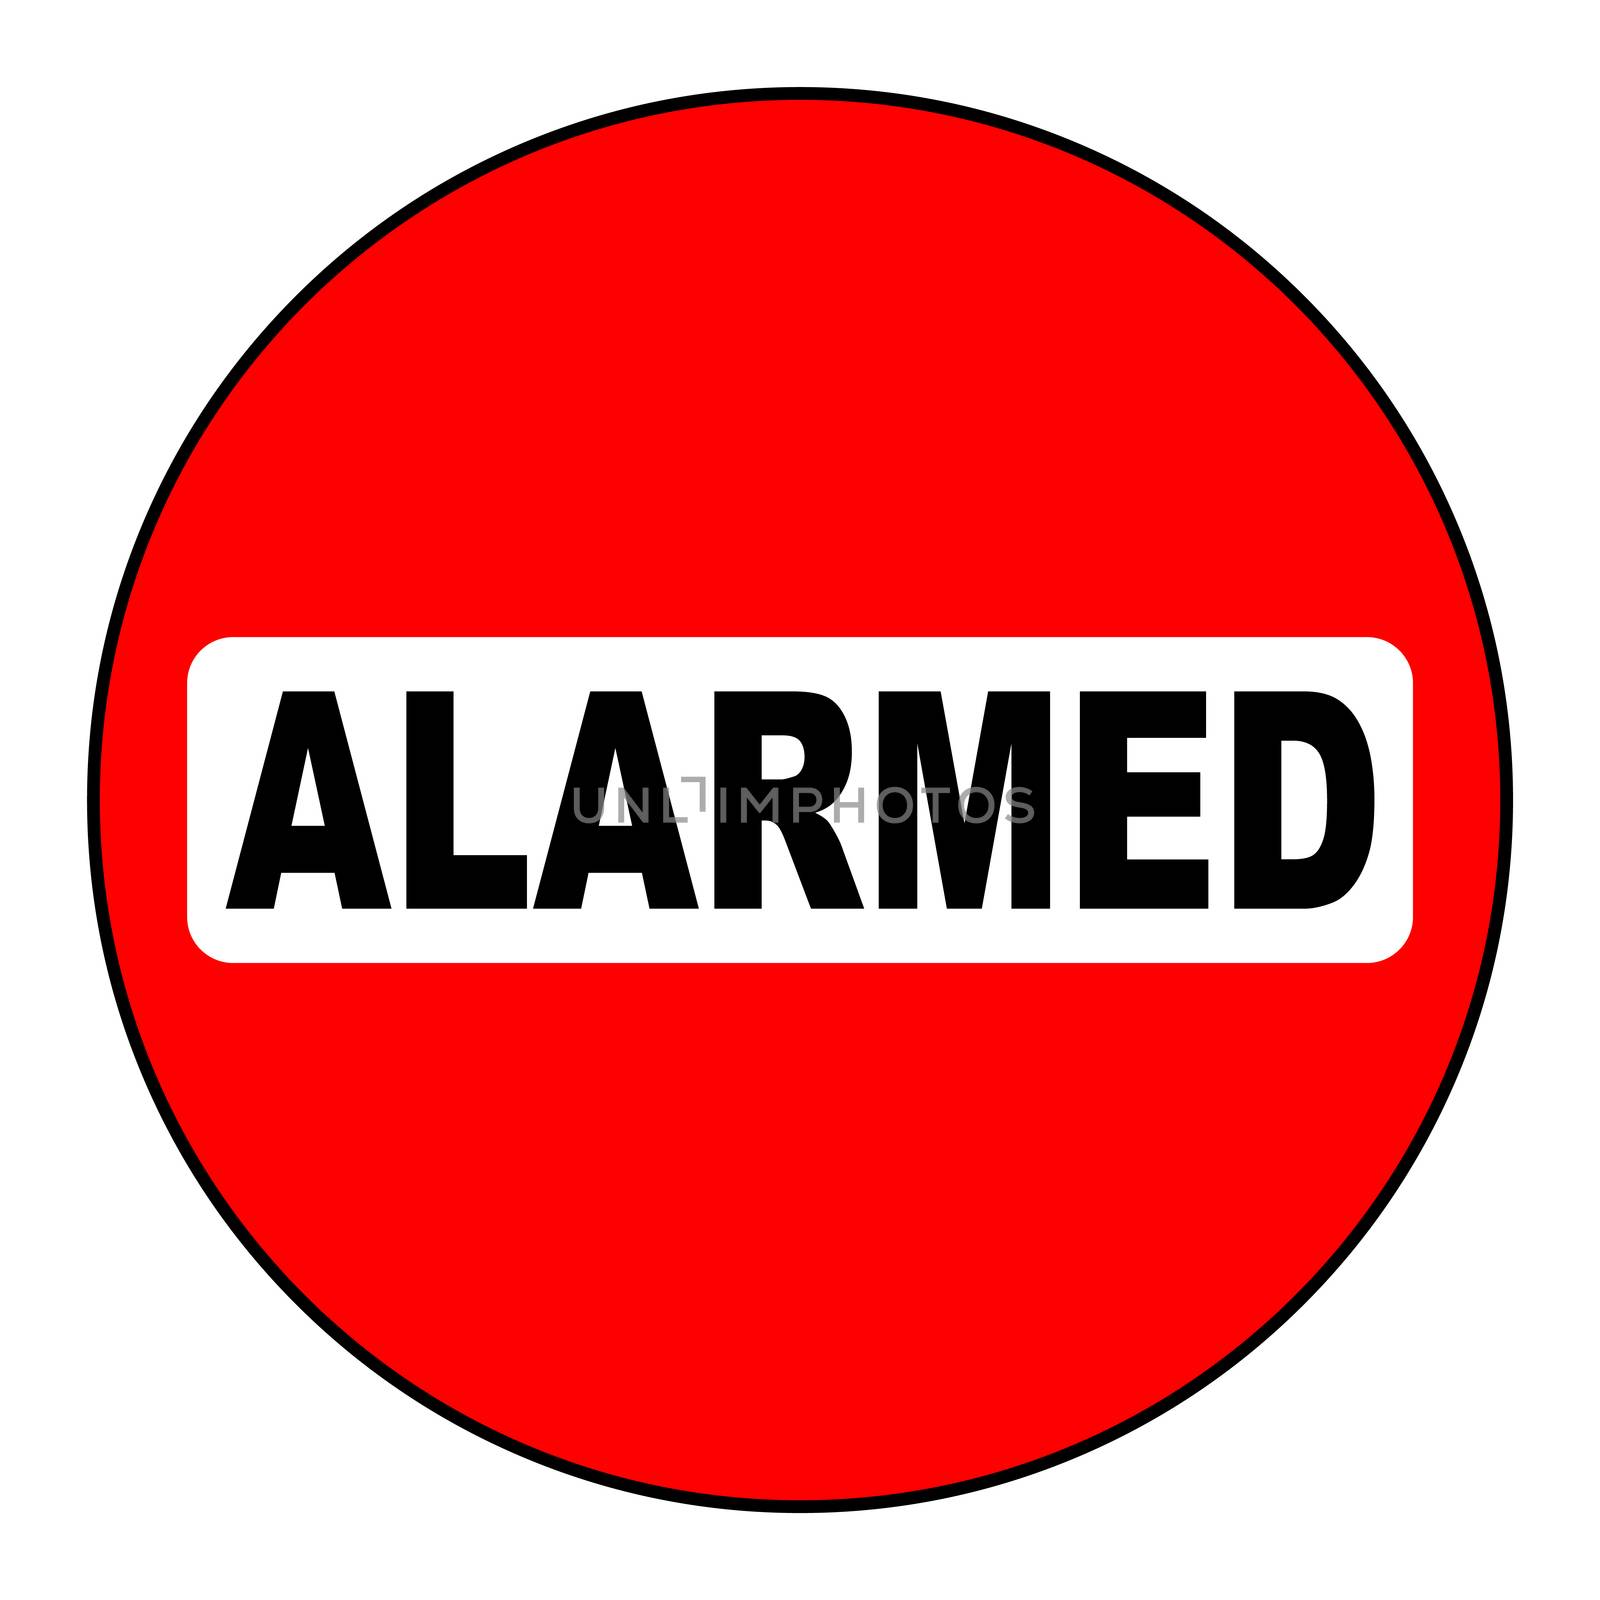 An Alarmed sign in red and black over a white background